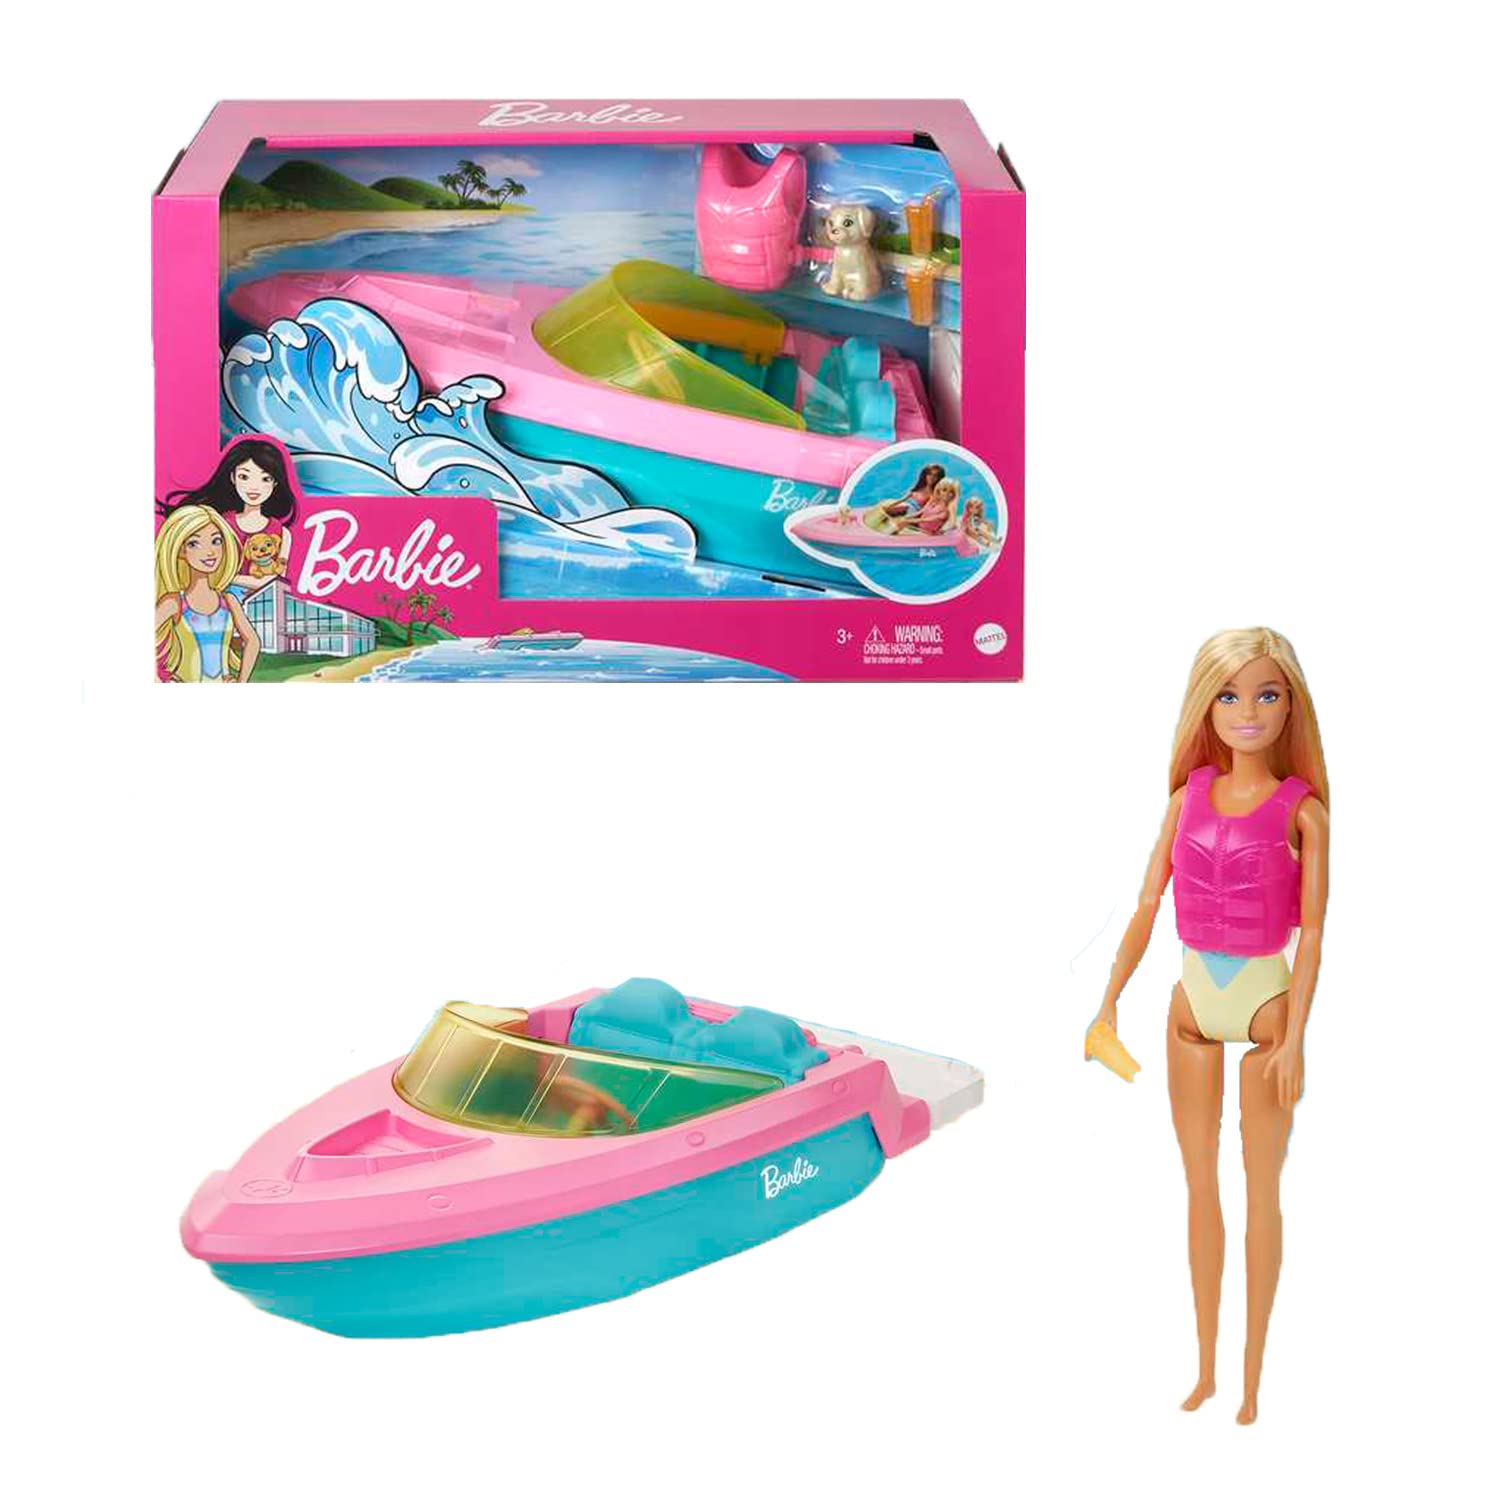 Barbie Doll and Boat Playset with Pet Puppy, Life Vest and Beverage Accessories, Fits 3 Dolls and Floats in Water